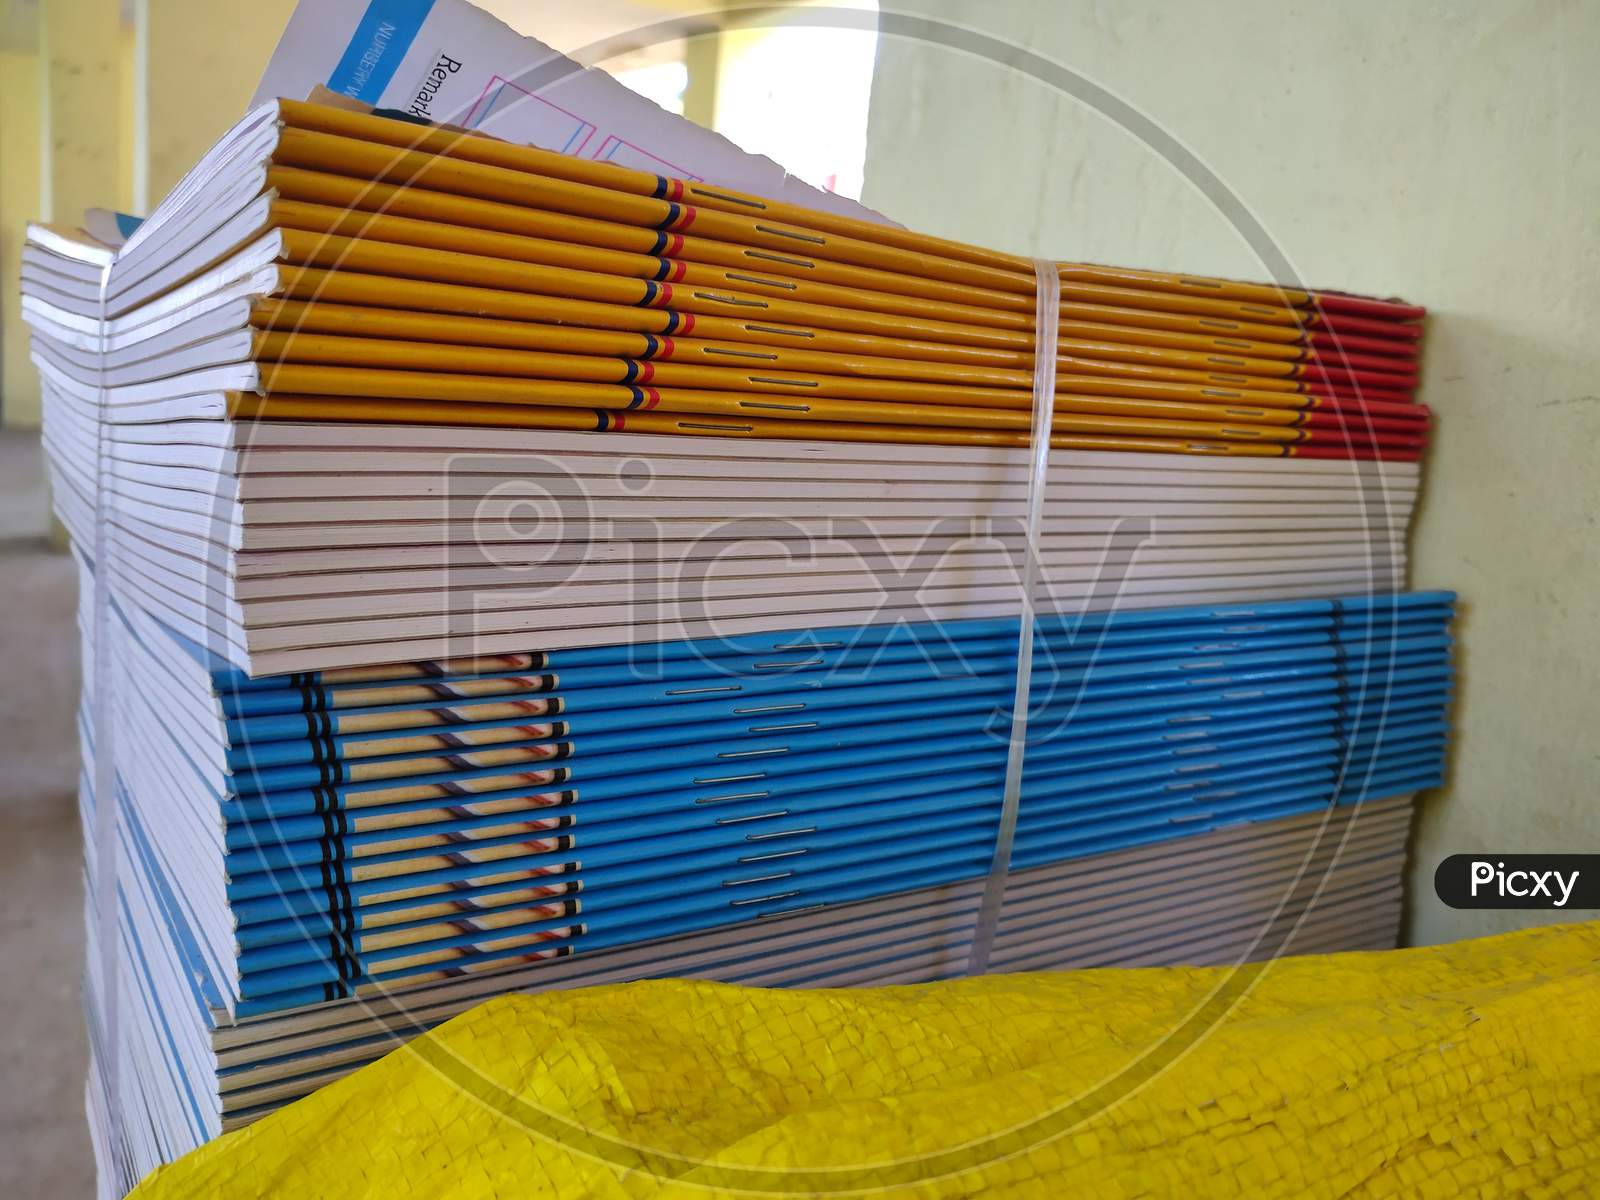 Bundle Of Multicolored Exercise Books Are Ready To Distribute To School Students. Bunch Of School Edge Book.